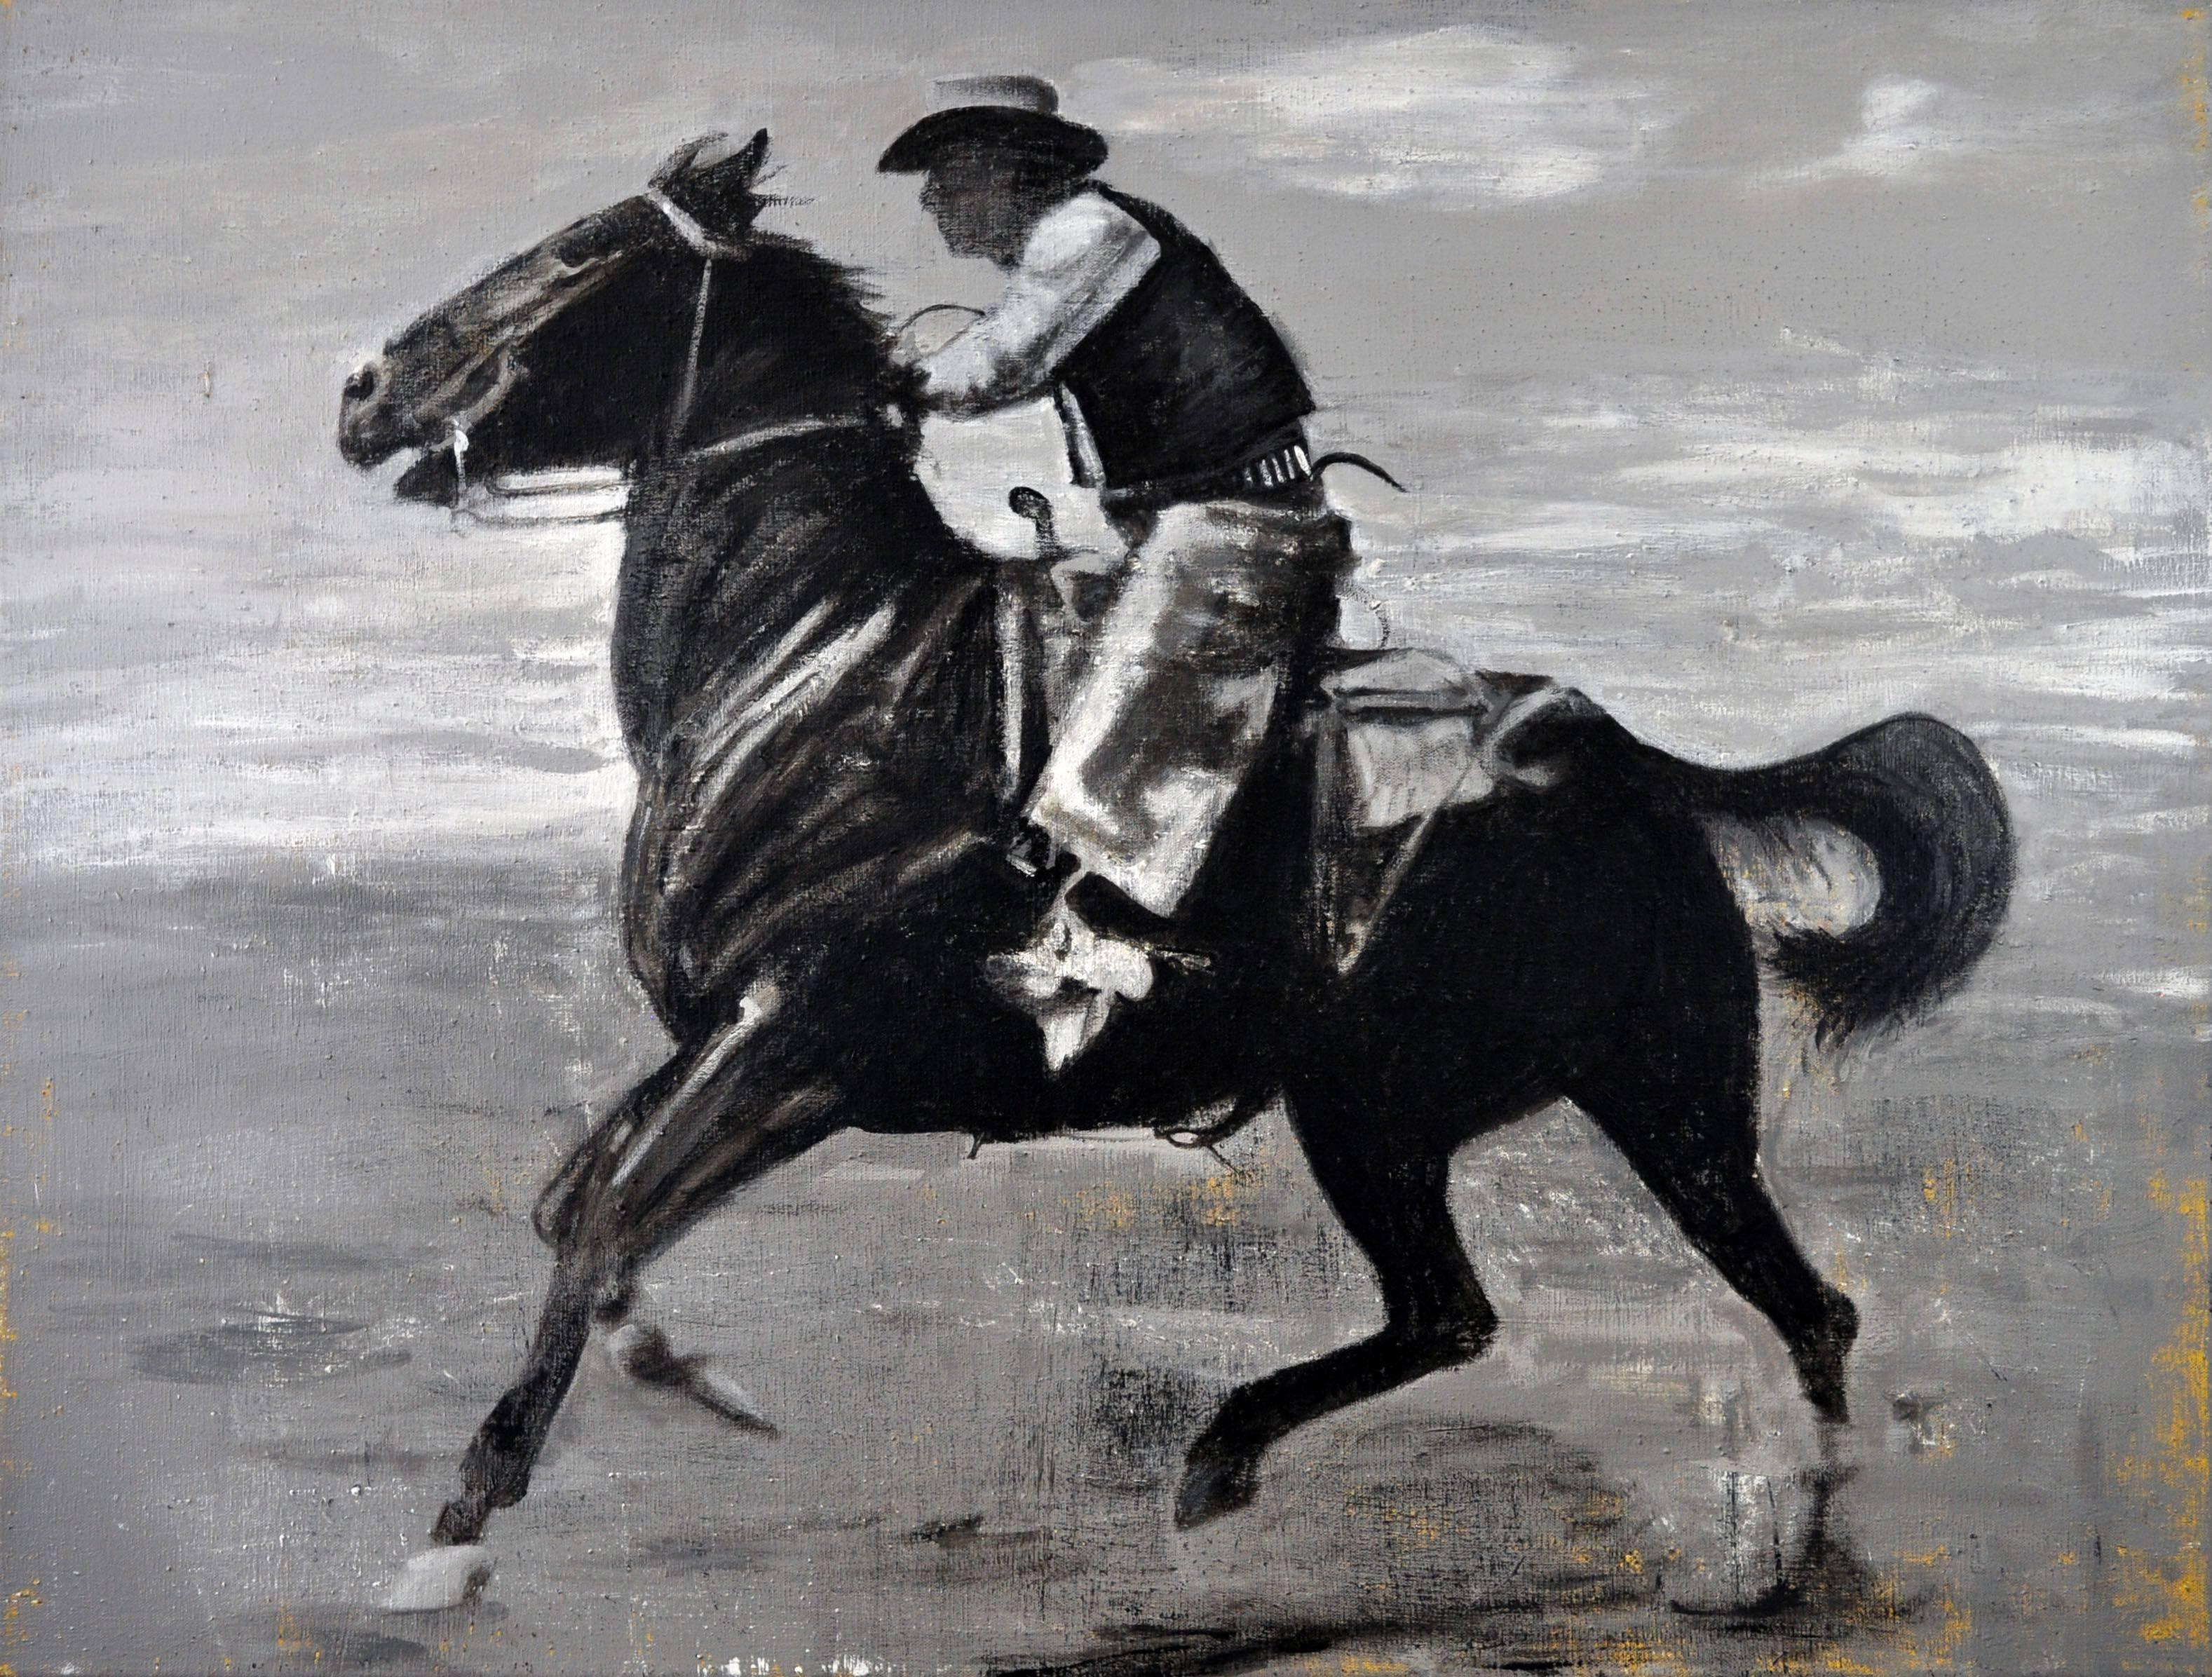 Cowboy Space of Time - Painting by Gordon McConnell